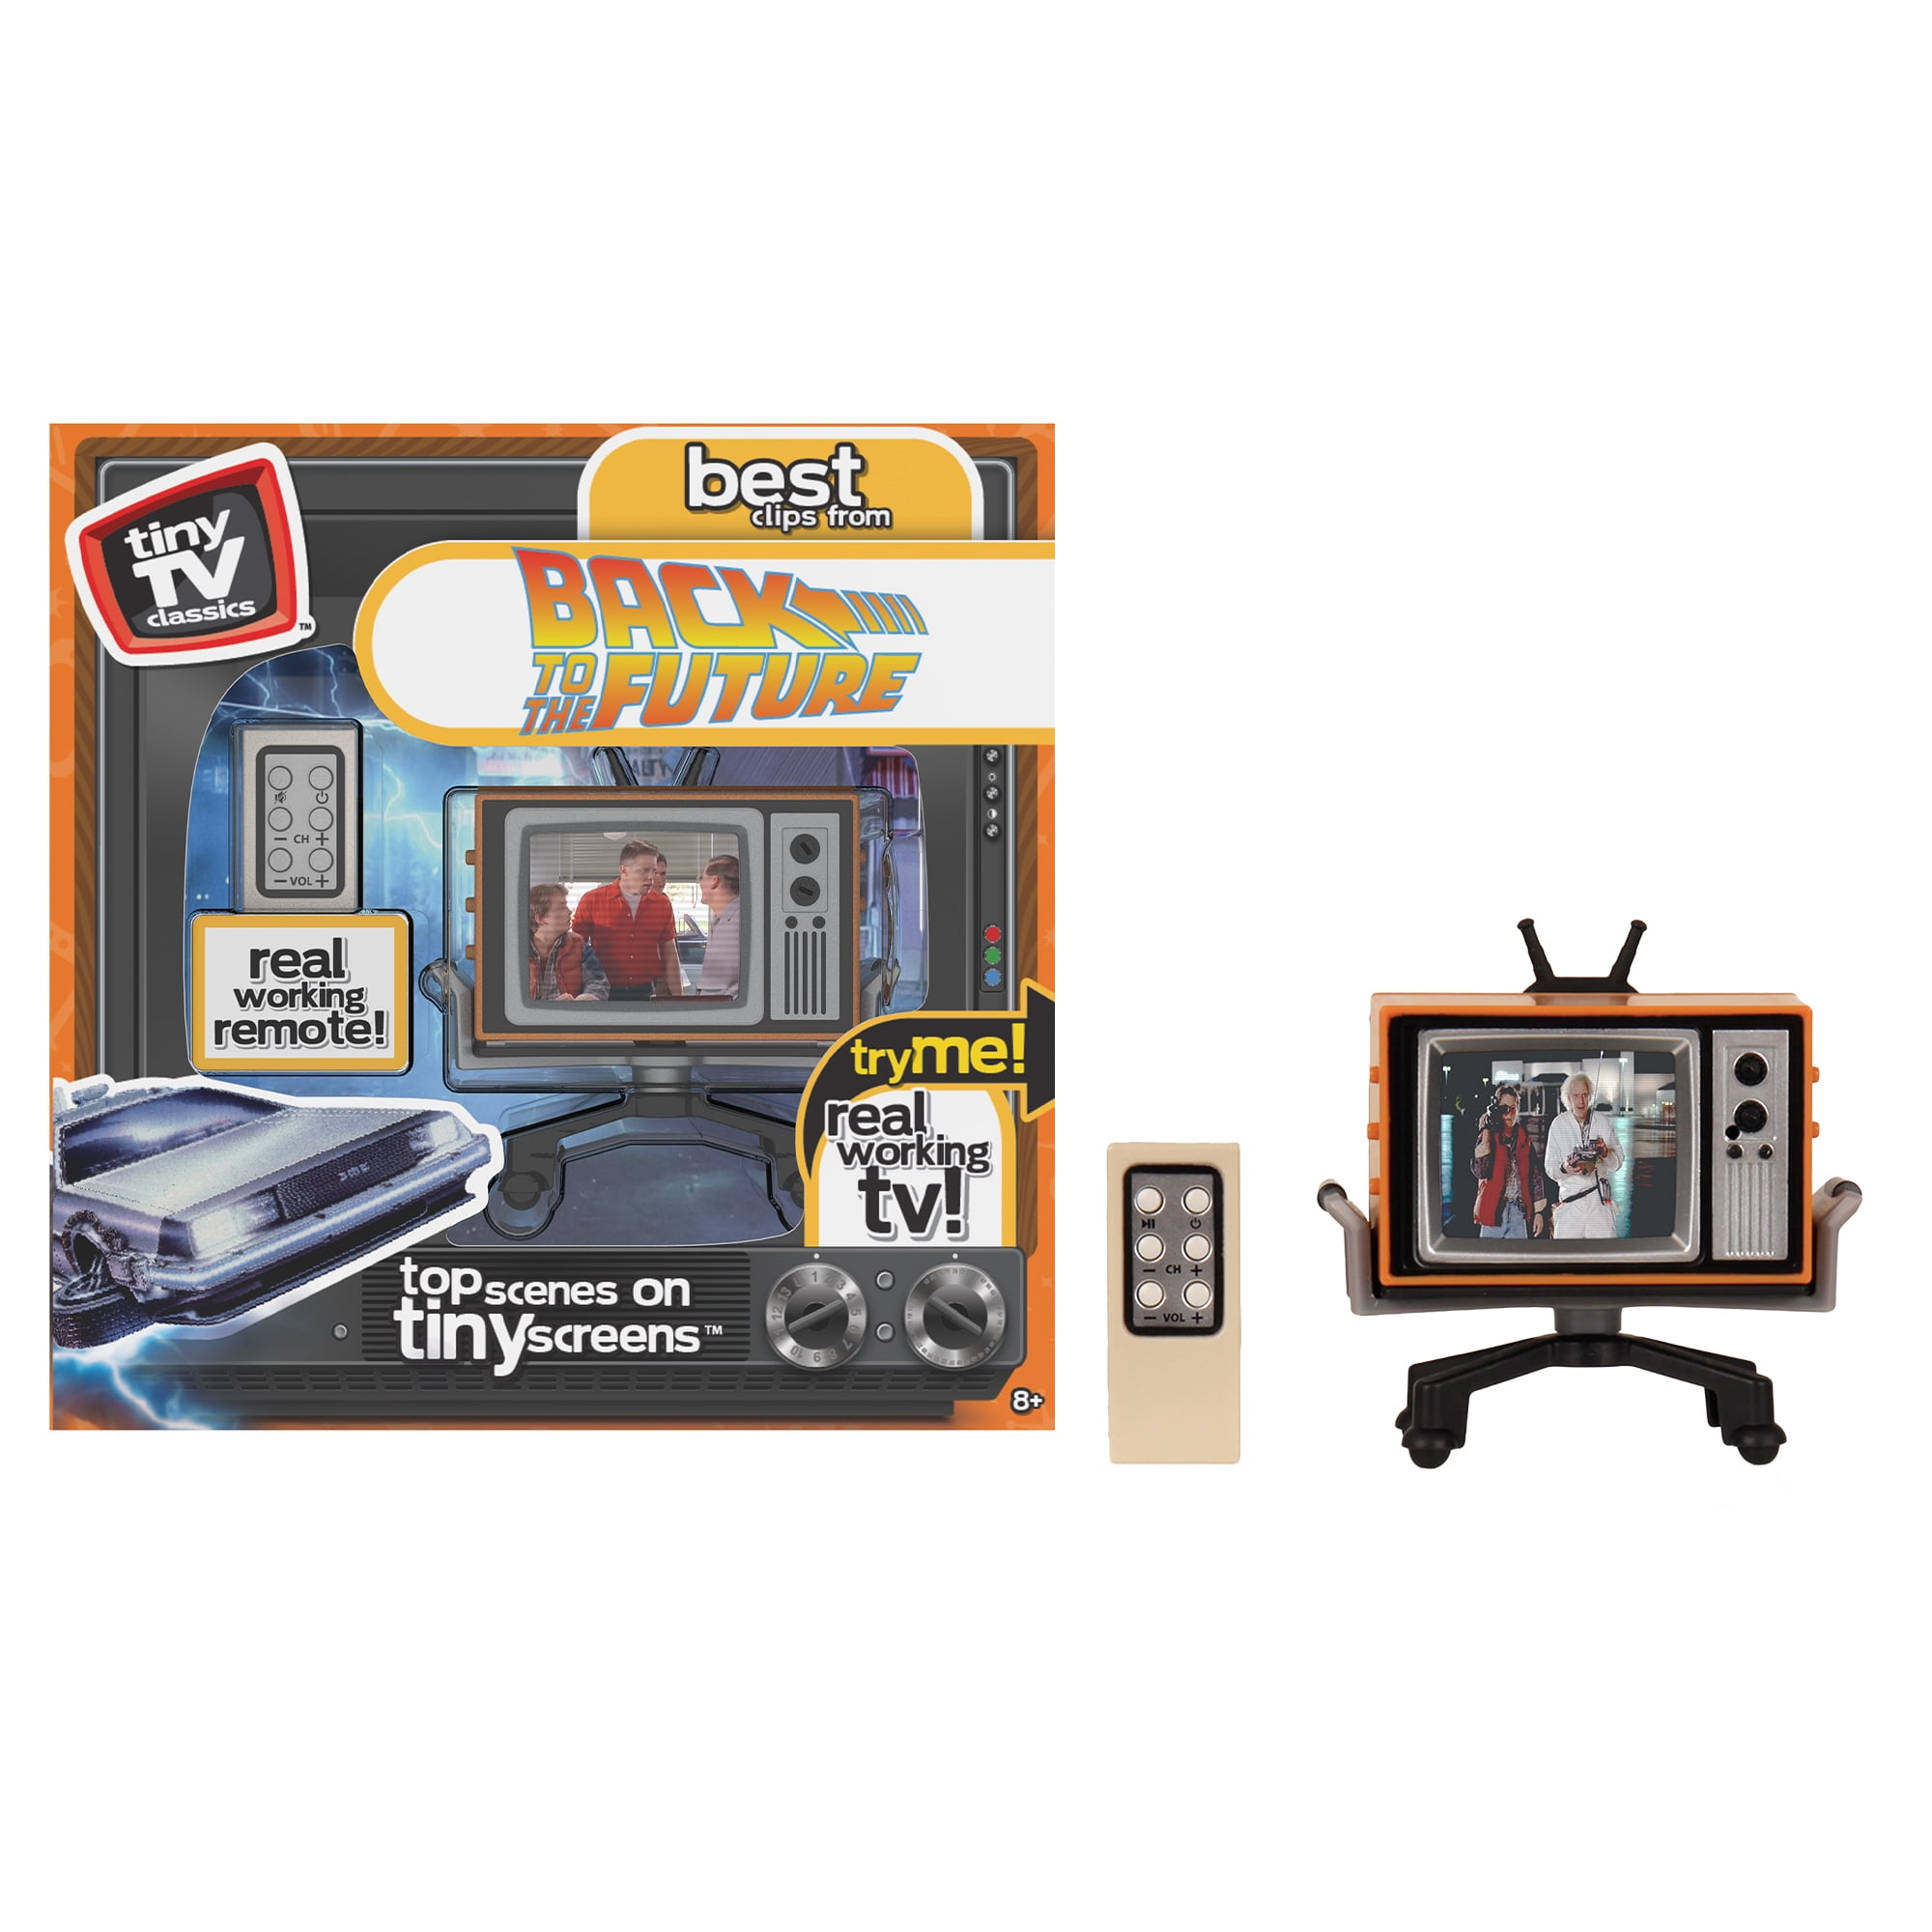 New Fall 21 Tiny Tv Classics Back To The Future Edition Newest Collectible From Basic Fun Watch Top Back To The Future Original Movie Scenes On A Real Working Tiny